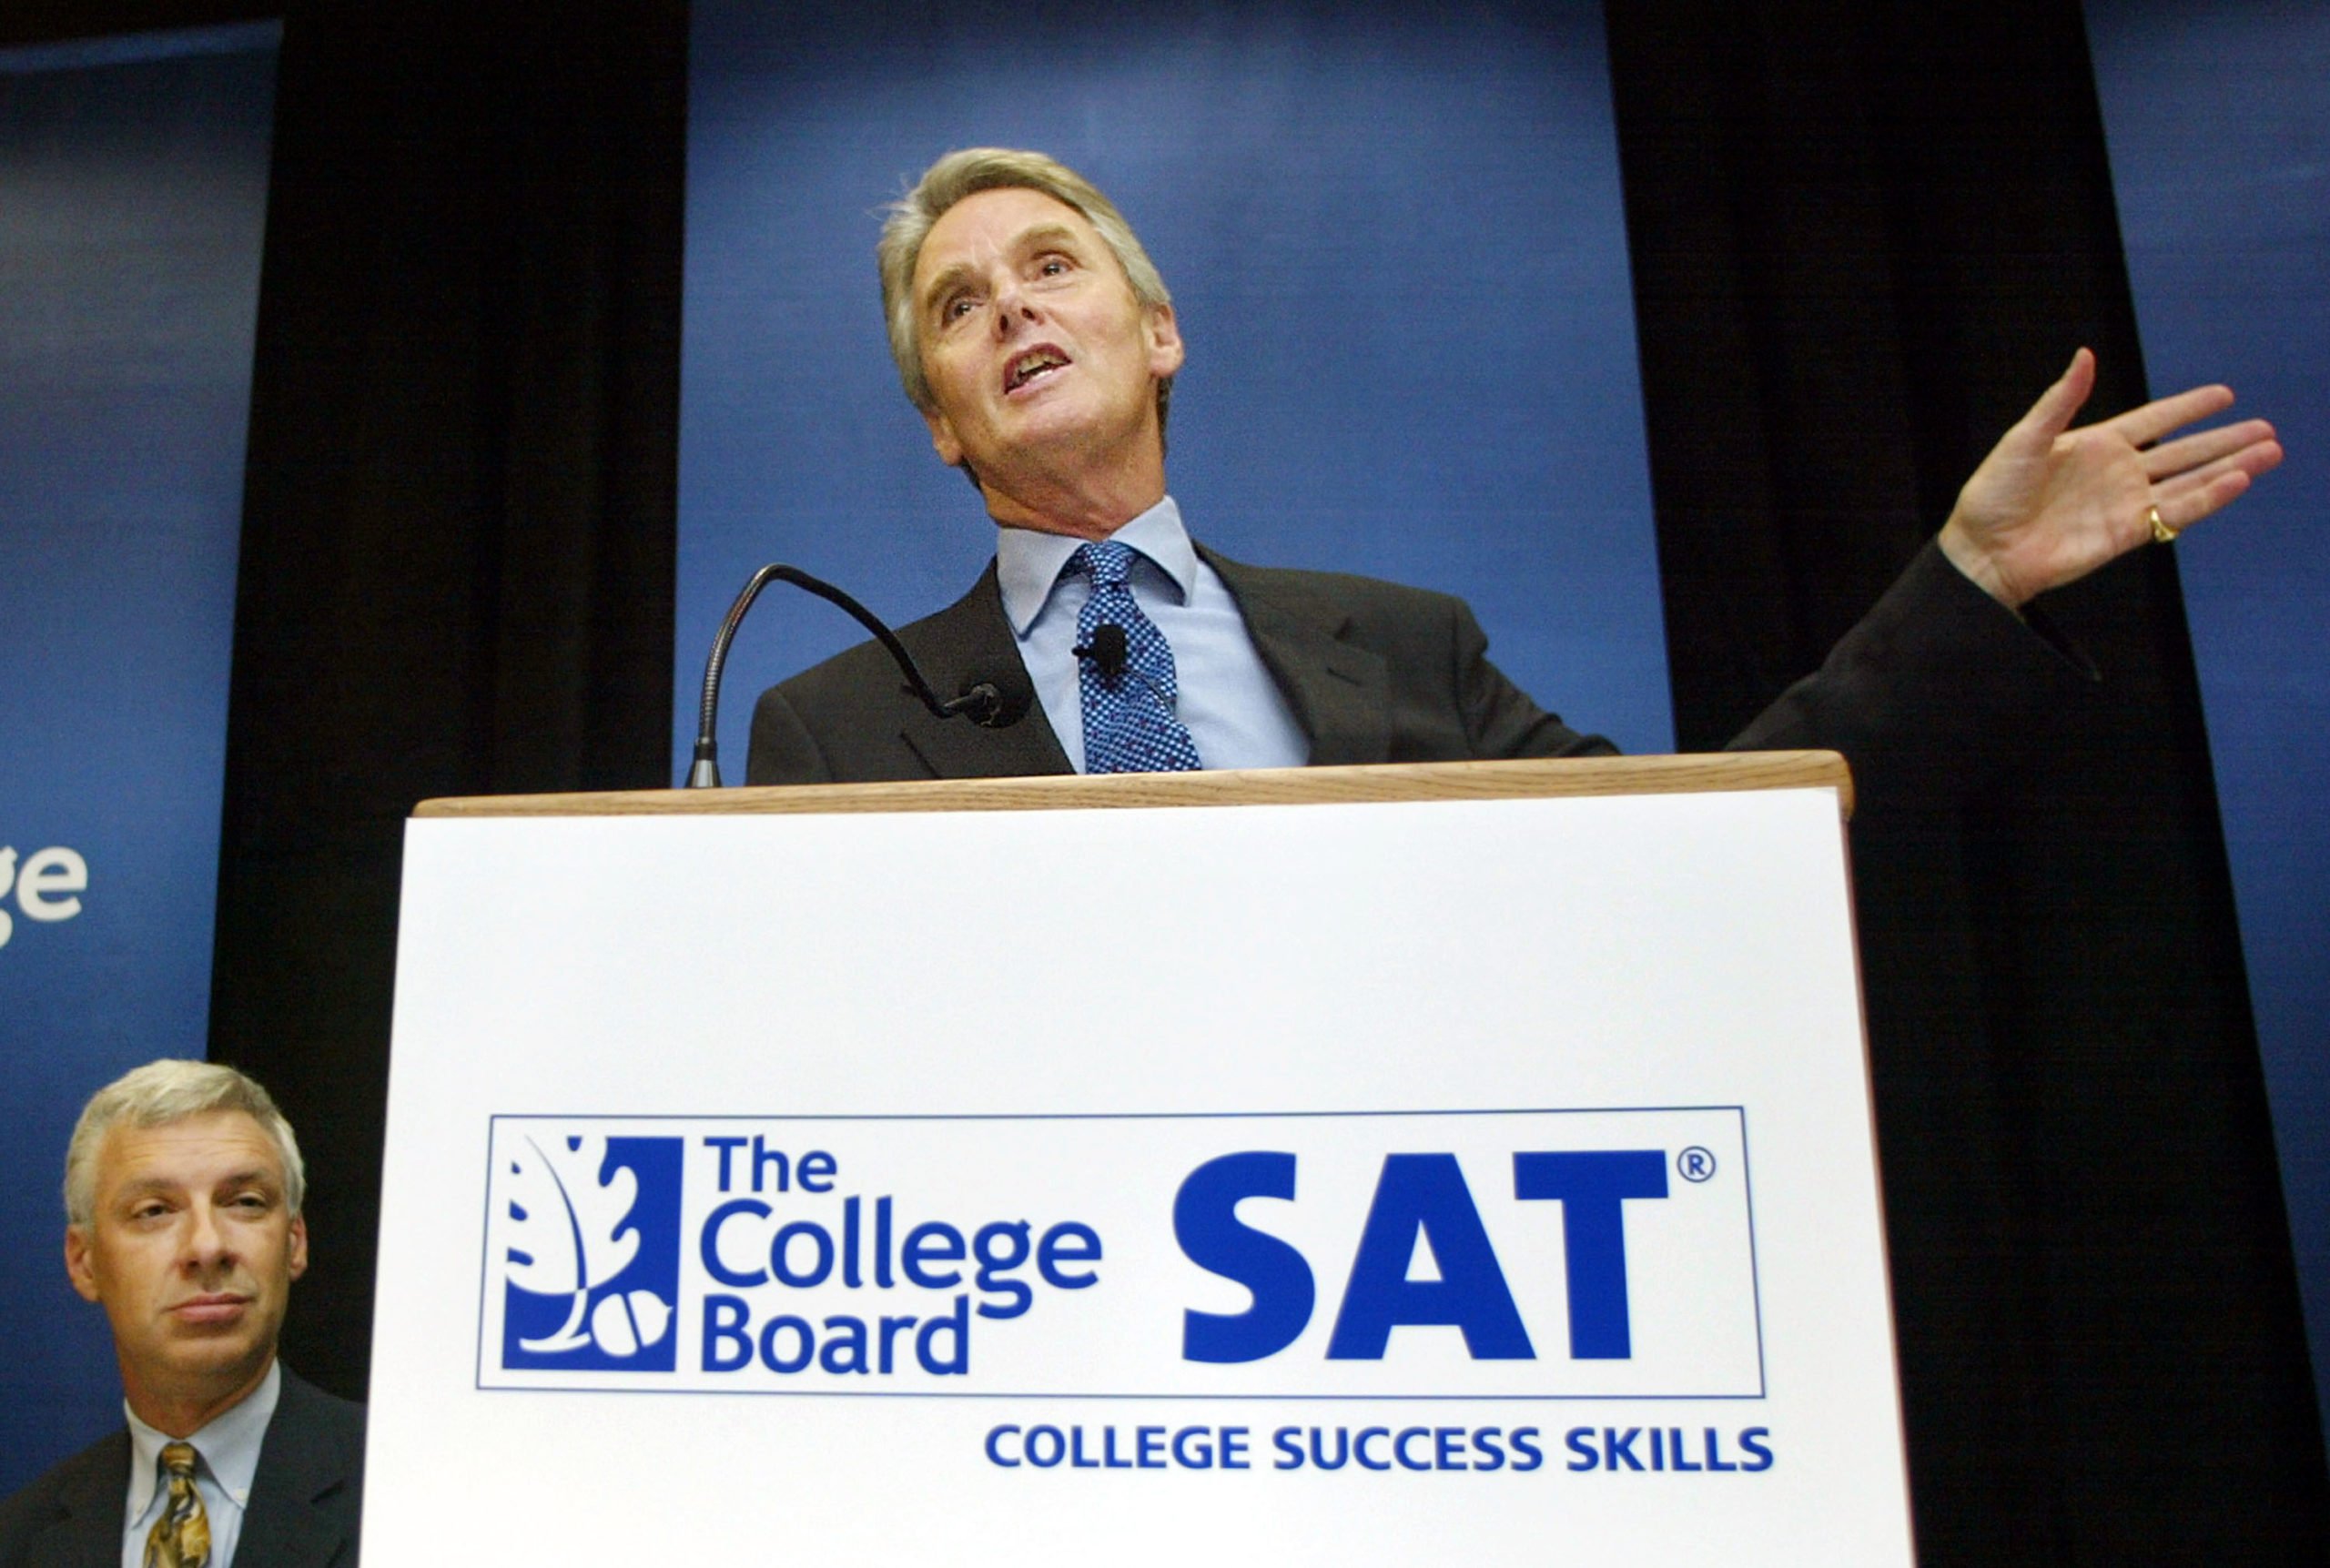 College Board President Gaston Caperton speaks at a press conference as Dr. Wayne Camara, vice president of research and development, looks on at College Board headquarters June 27, 2002 in New York City. College Board trustees decided June 27 to add a written essay and other changes to the SAT in an overhaul of the college entrance exam. The first administration of the new SAT will occur in March of 2005. (Photo by Mario Tama/Getty Images)